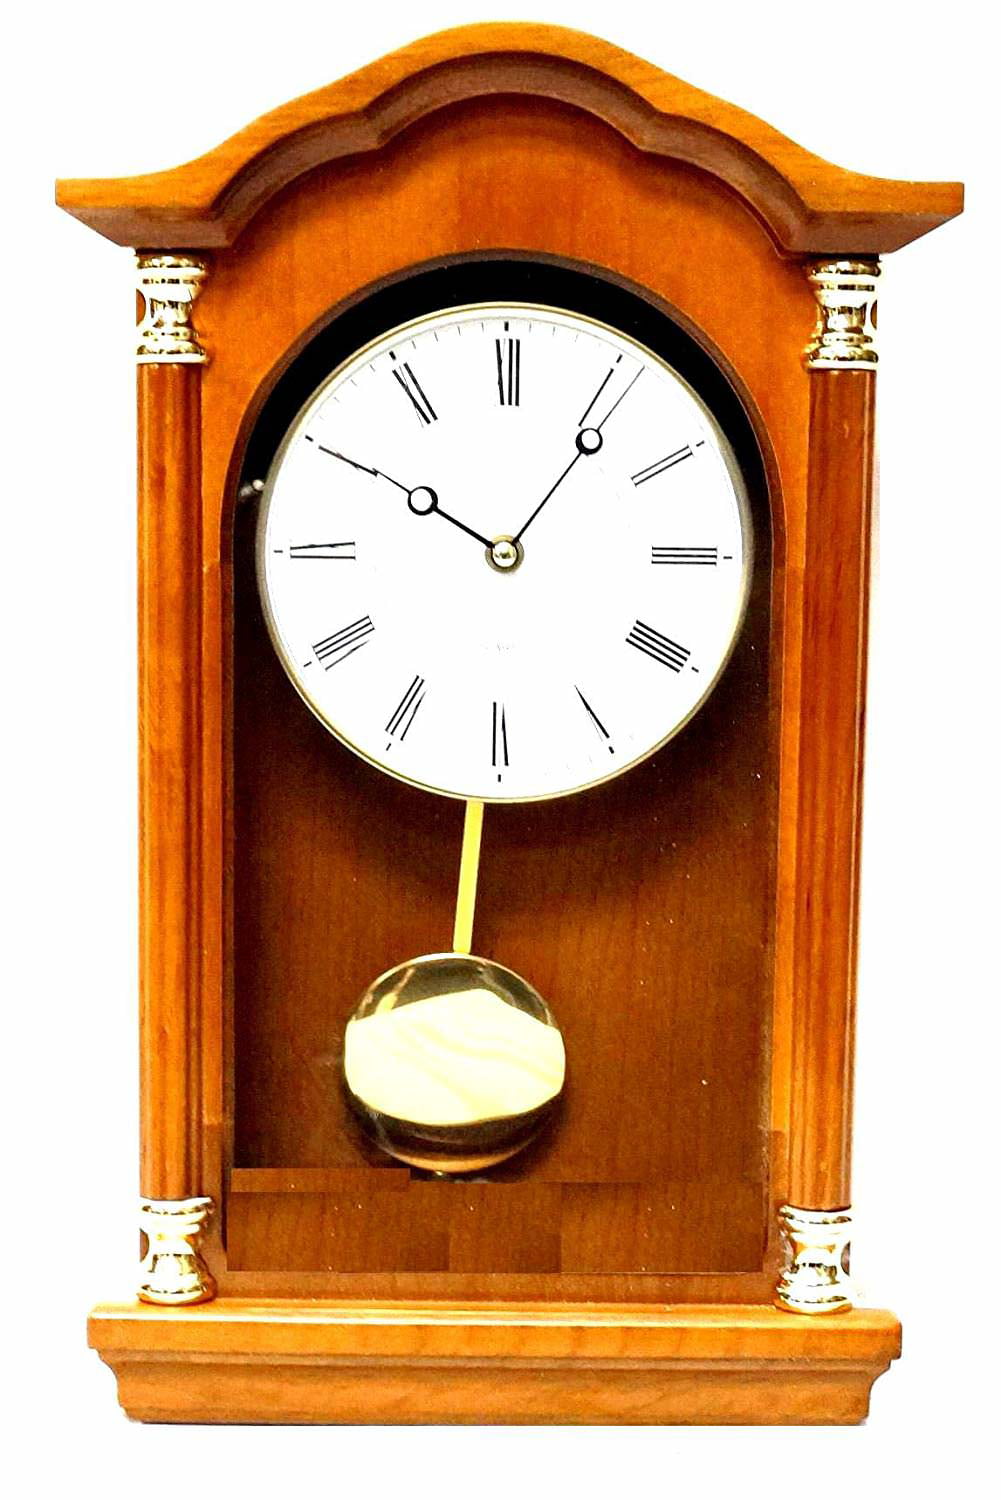 J D Best Pendulum Wall Clock Silent Decorative Wood With Swinging Battery Operated For Living Room Kitchen Office Home Décor Medium Brown Tqww4131 16 X 9 3 Inches - Wooden Wall Clock With Pendulum